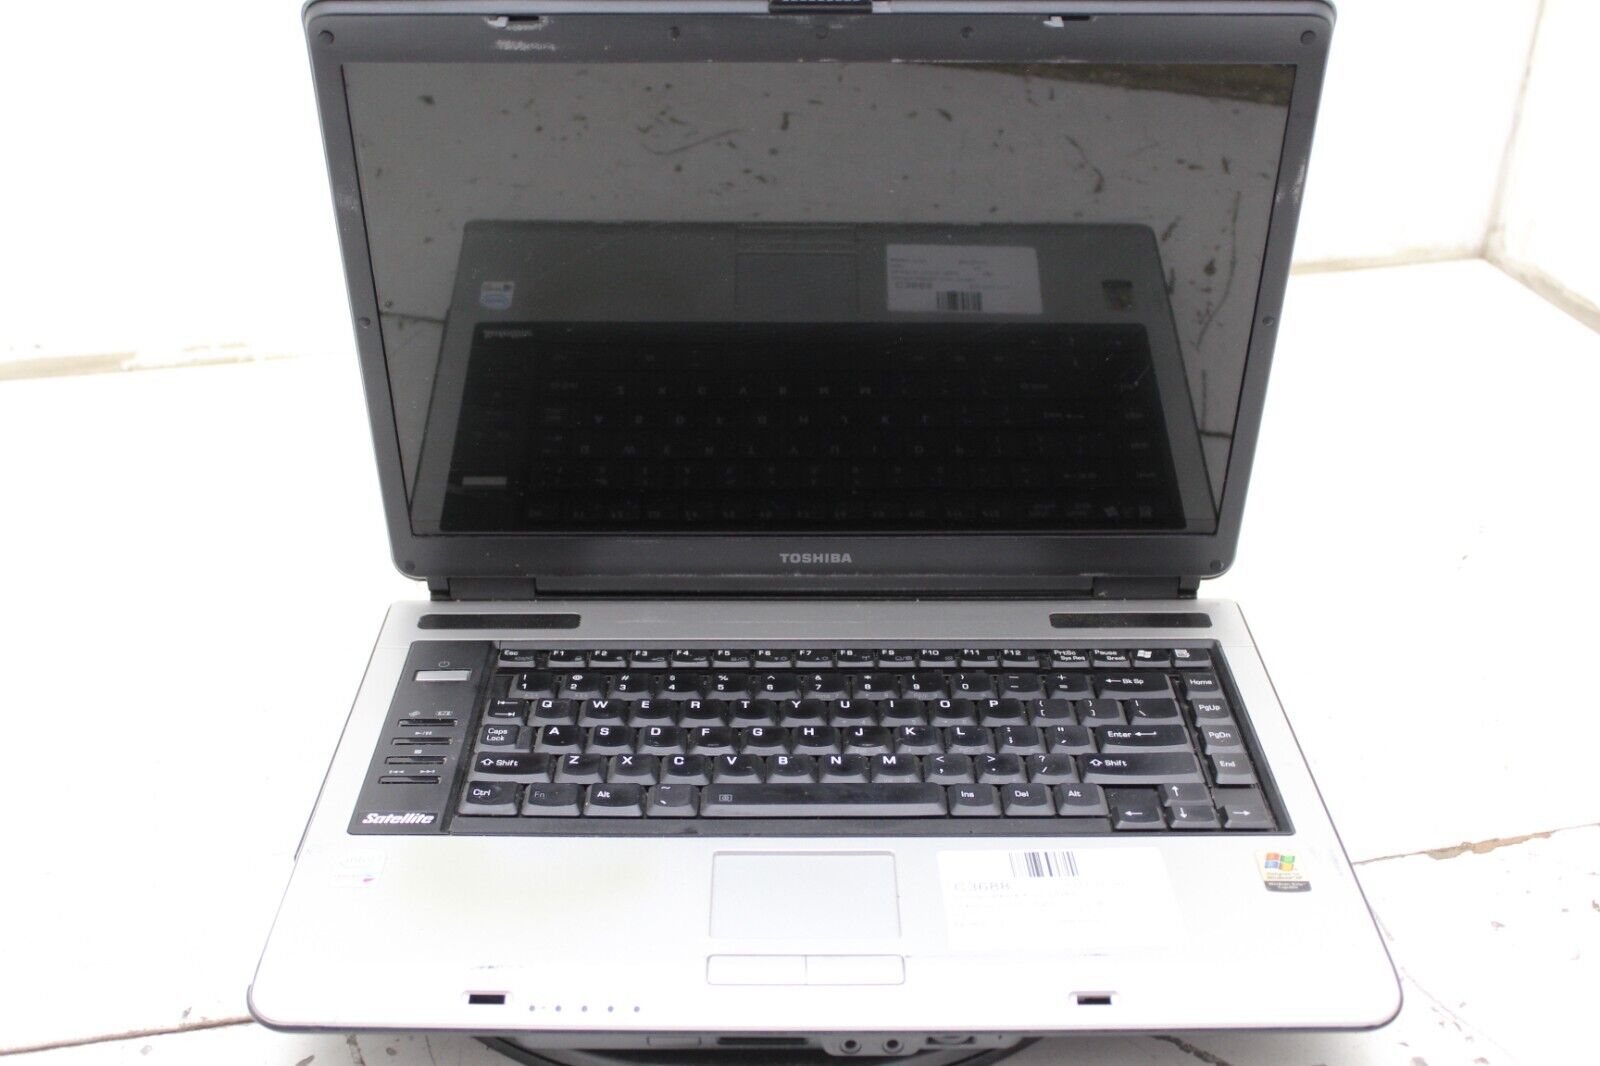 Toshiba Satellite A105-S4284 Laptop Intel Core 2 Duo 1GB Ram No HDD or Battery